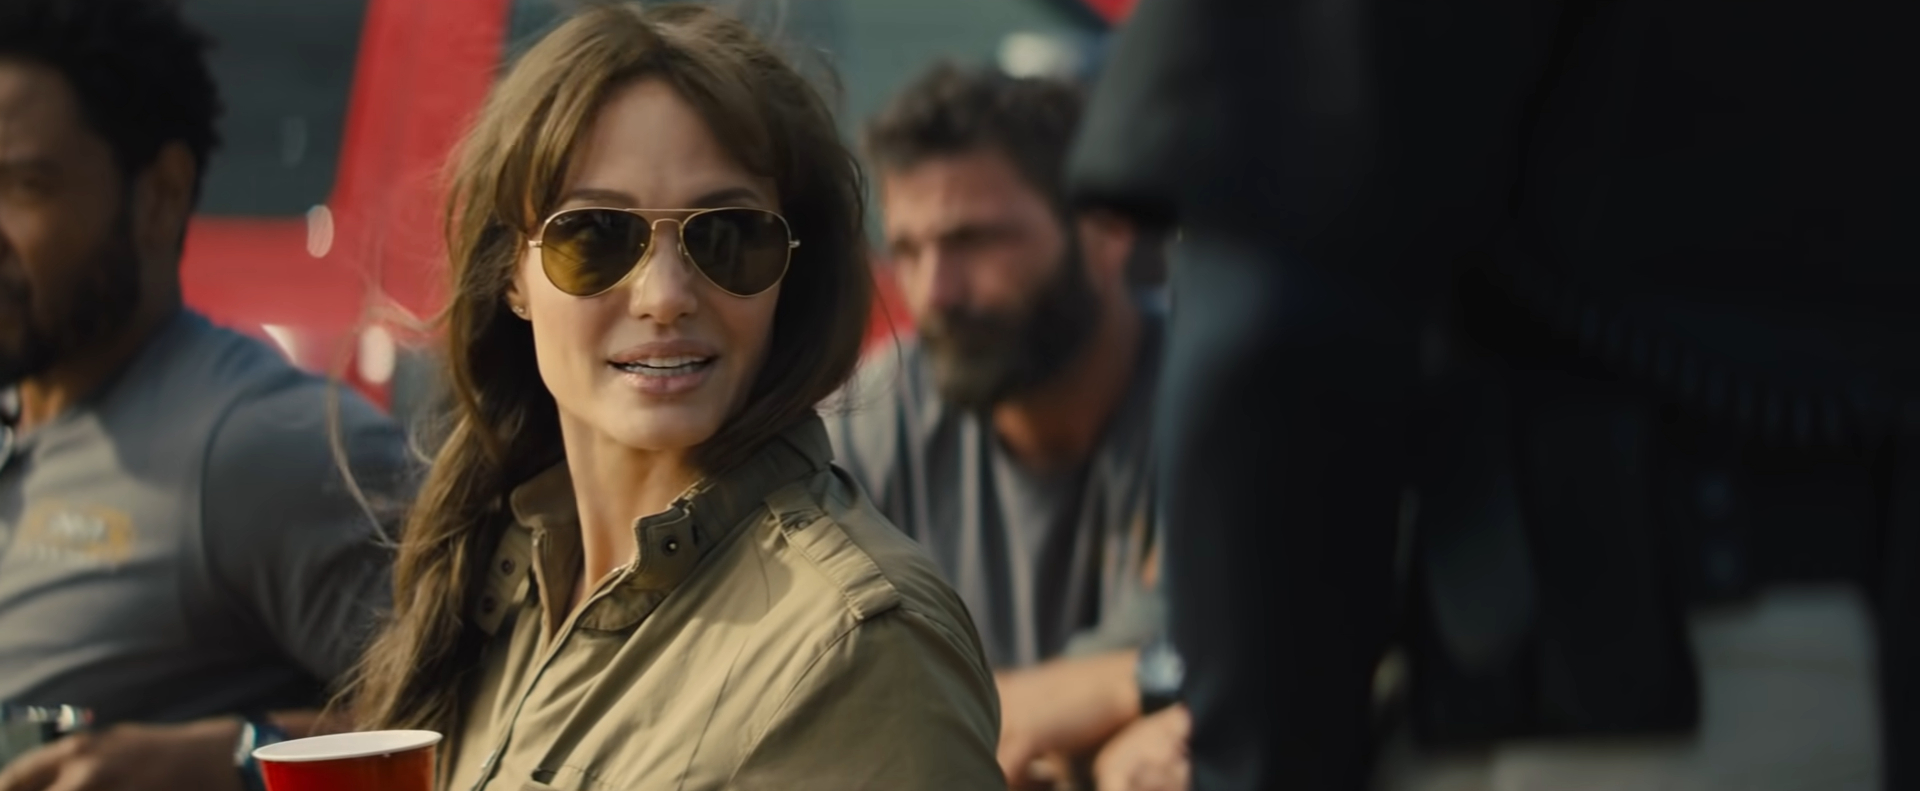 See Angelina Jolie’s Return To Action Movies In Those Who Wish Me Dead ...